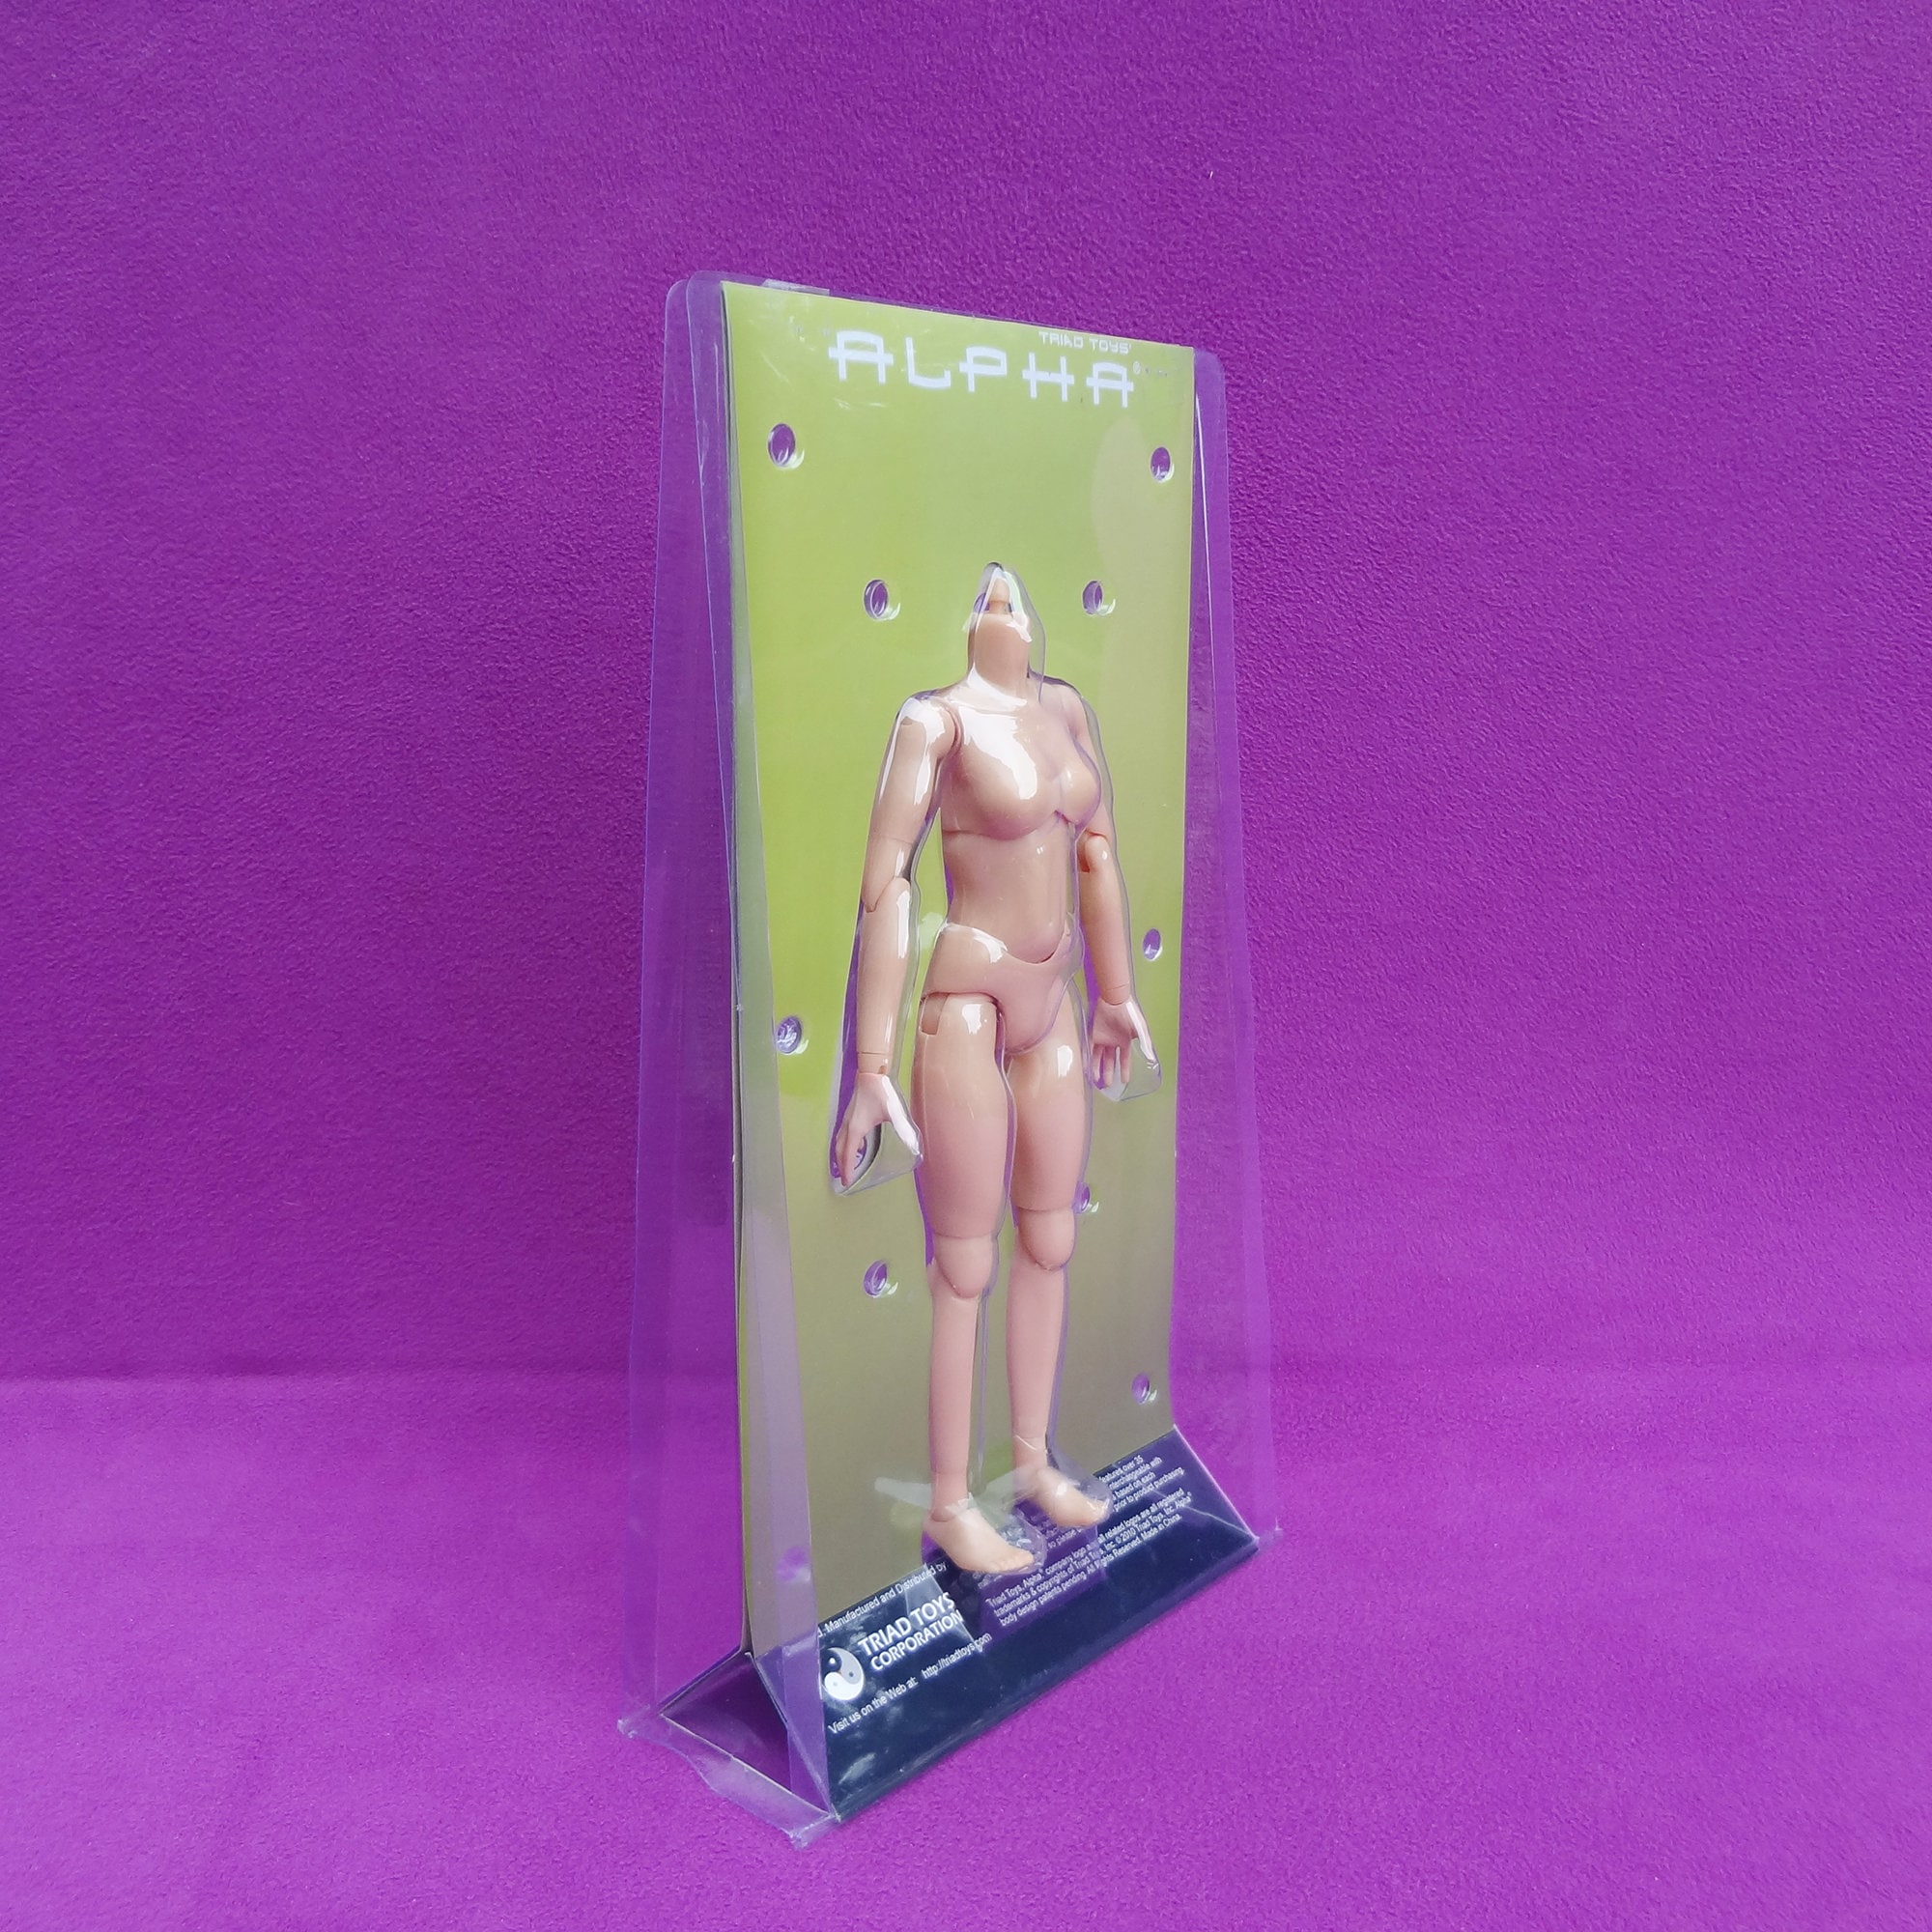 Alpha Triad Toys Female Action Figure Small Chest Headless Body 35 Pts of  Articulation Interchangeable With 12 Figures You Design 